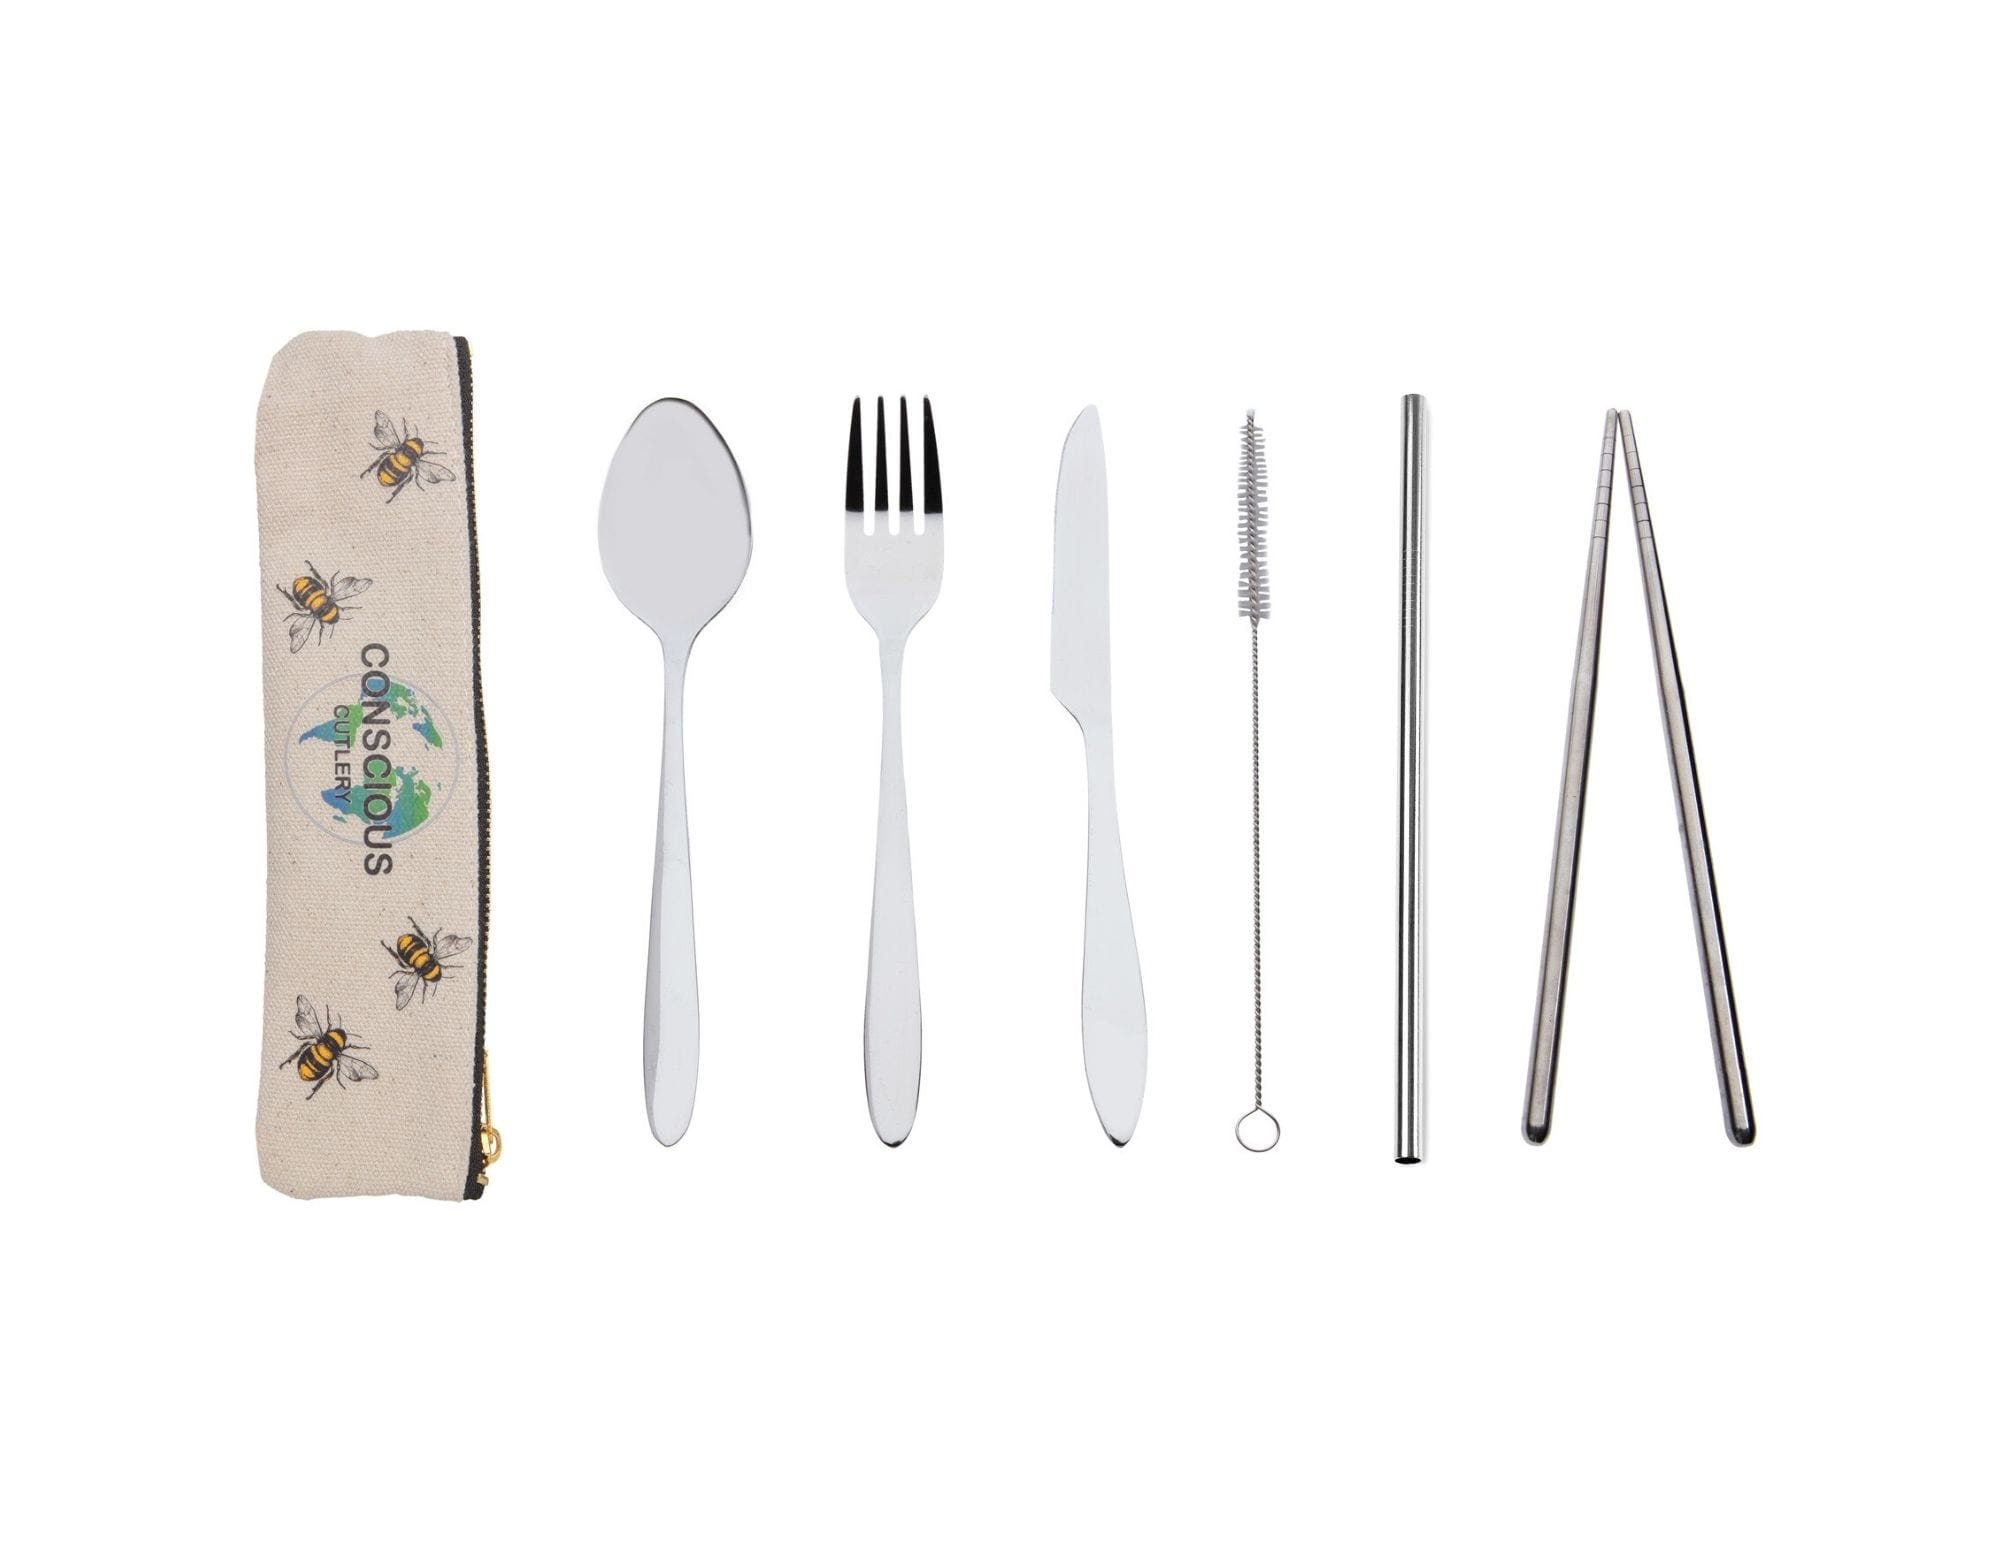 Forkanife Travel, Ultra-thin Travel Utensils, Stainless Steel Fork and  Knife Travel Silverware, Safe and Reusable Travel Cutlery Set for Schools